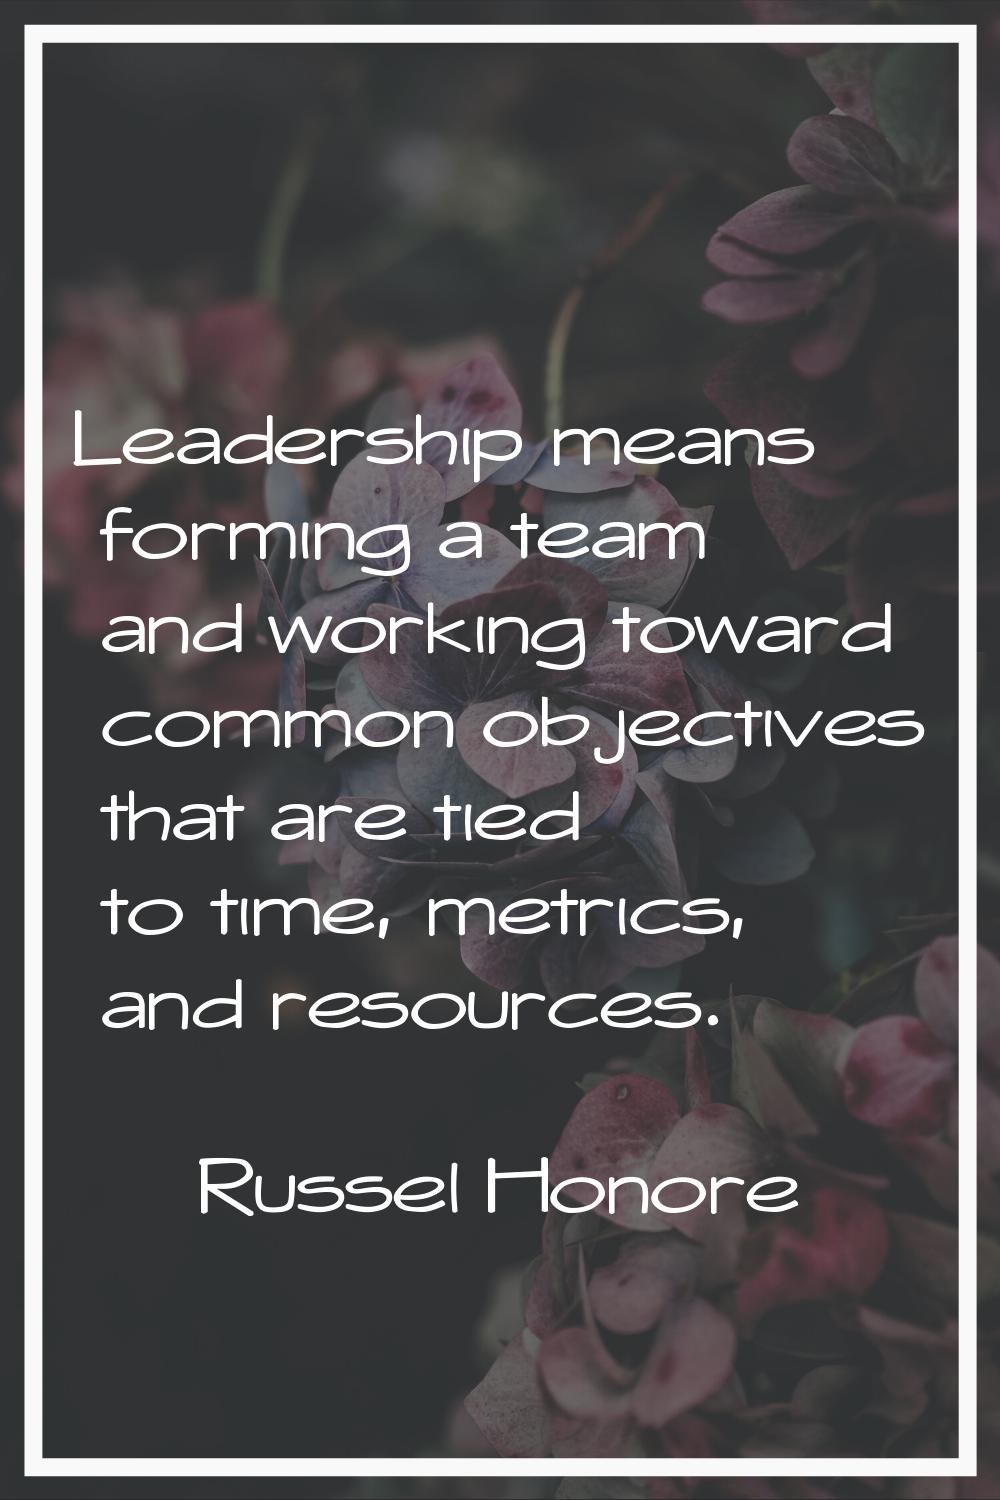 Leadership means forming a team and working toward common objectives that are tied to time, metrics